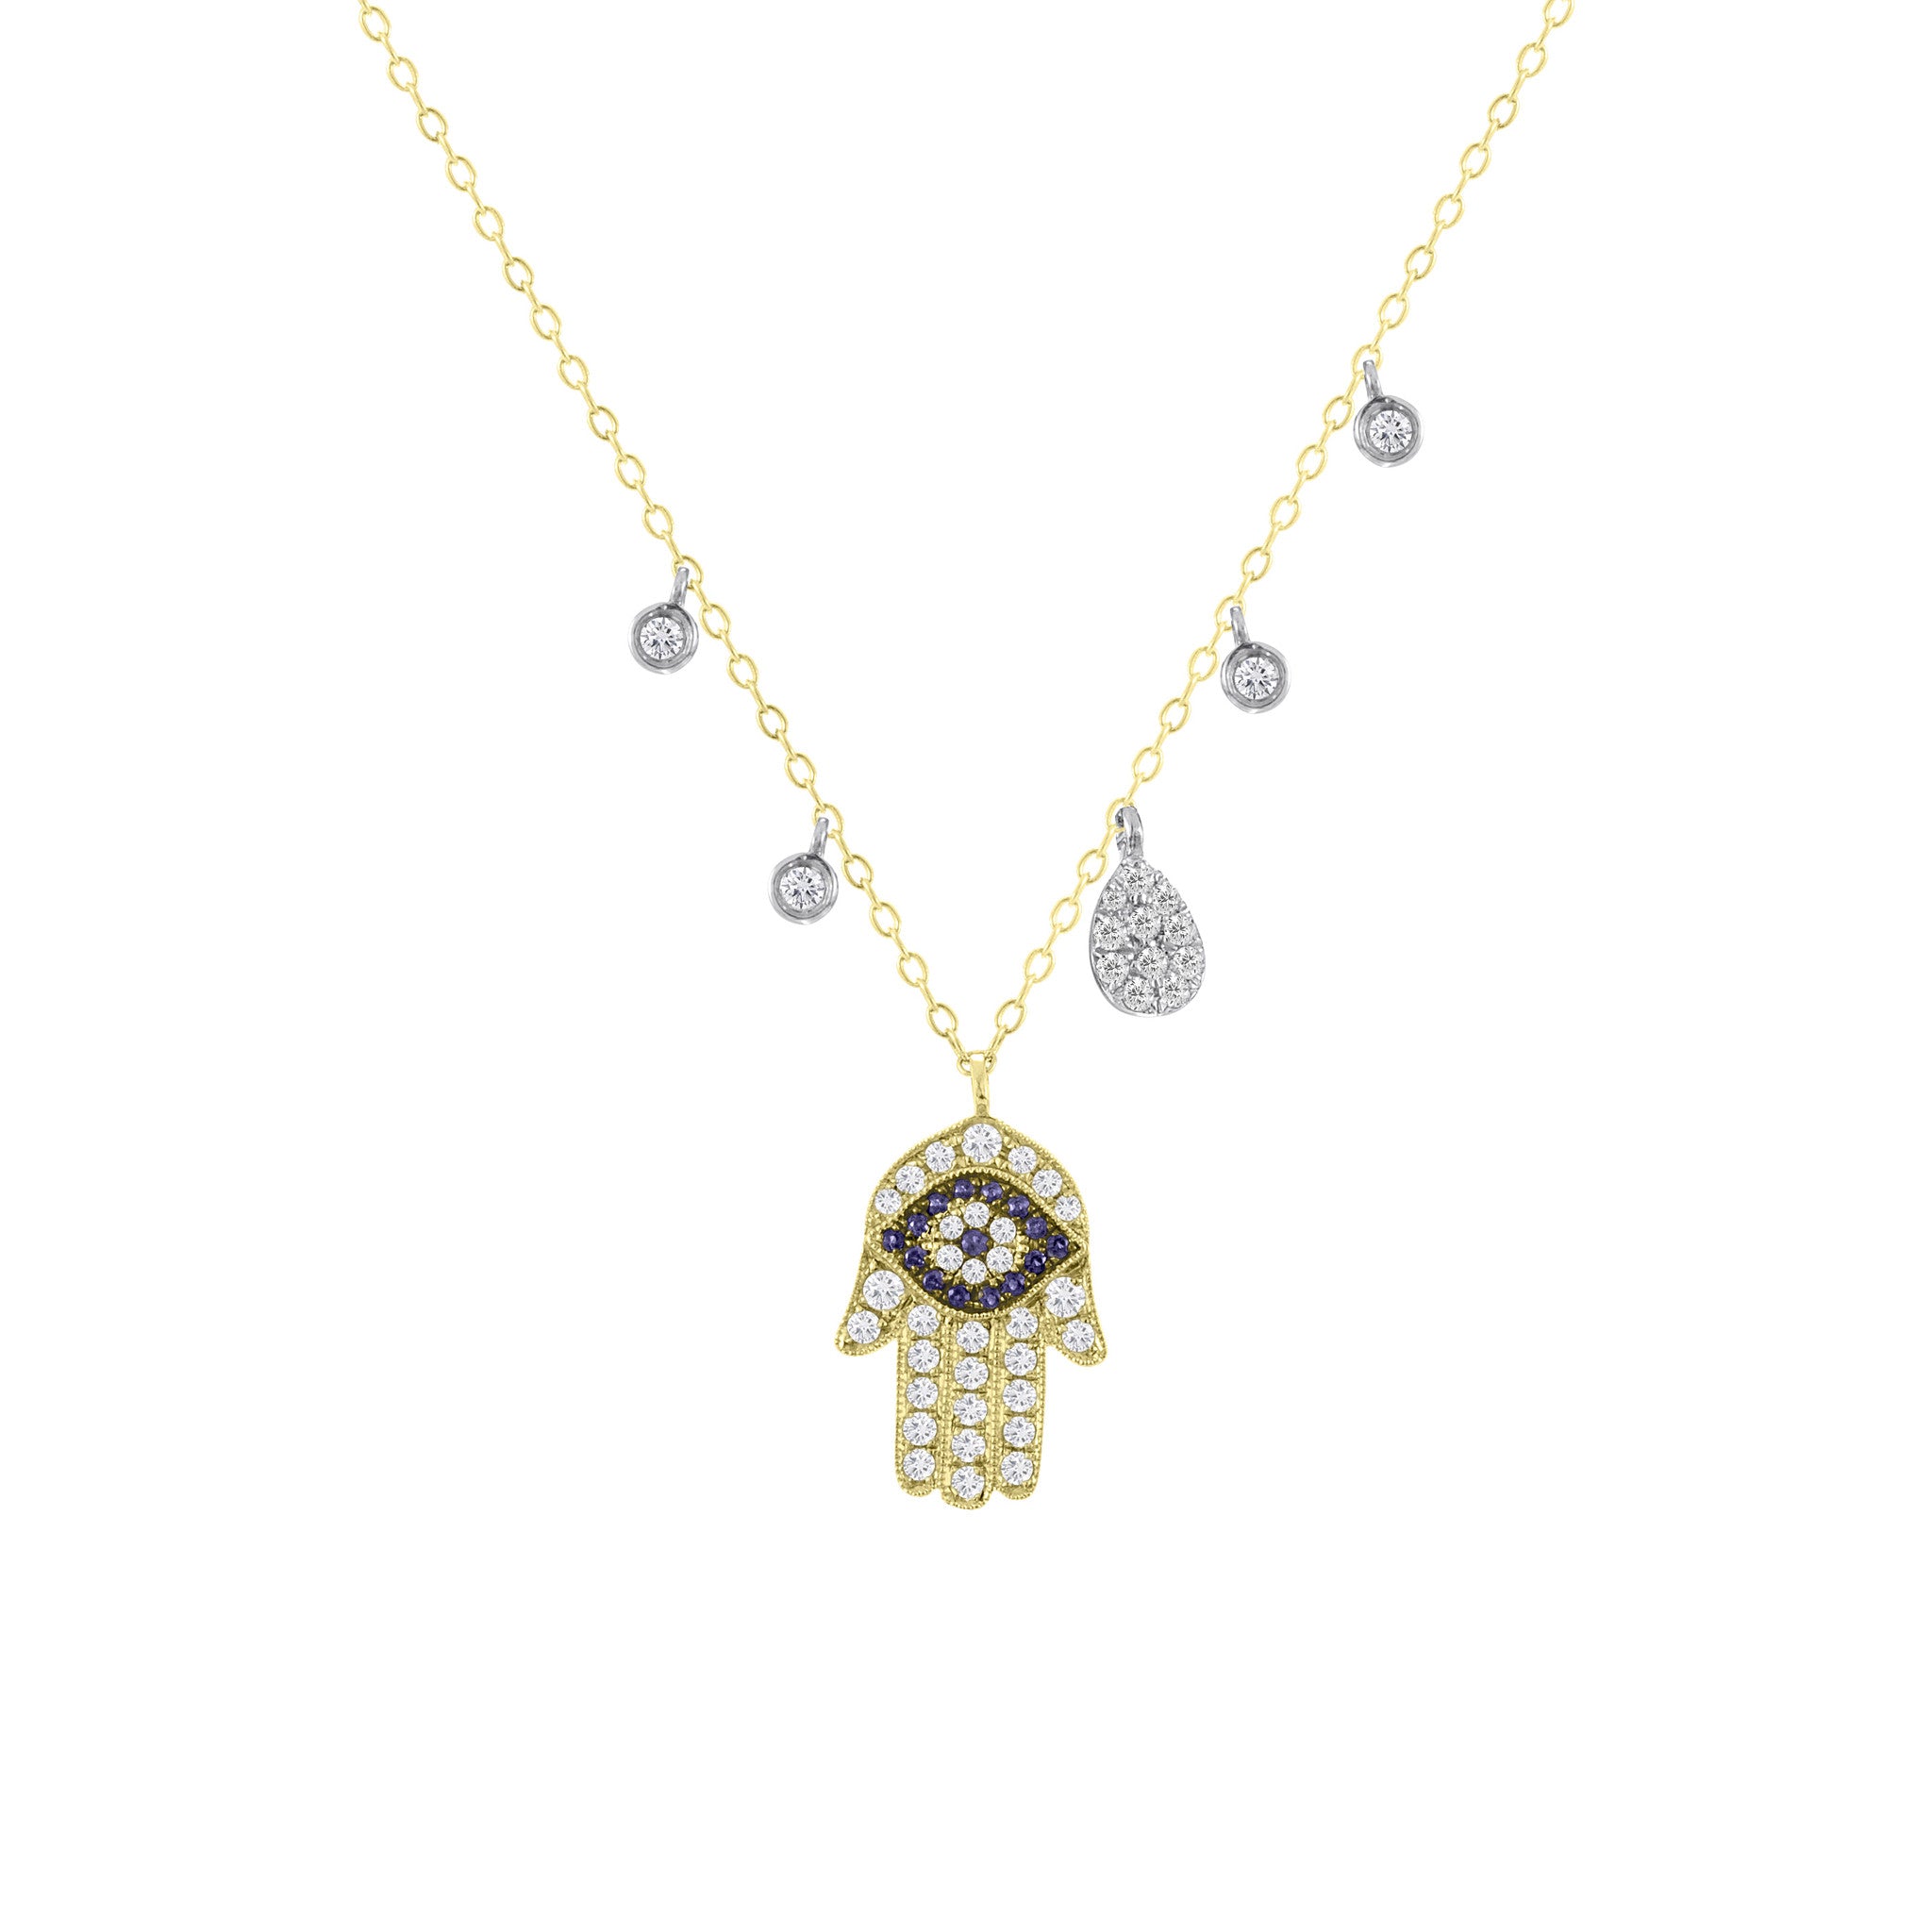 Meira T 14k Hamsa & Evil Gold Necklace With Diamond Accent Charms